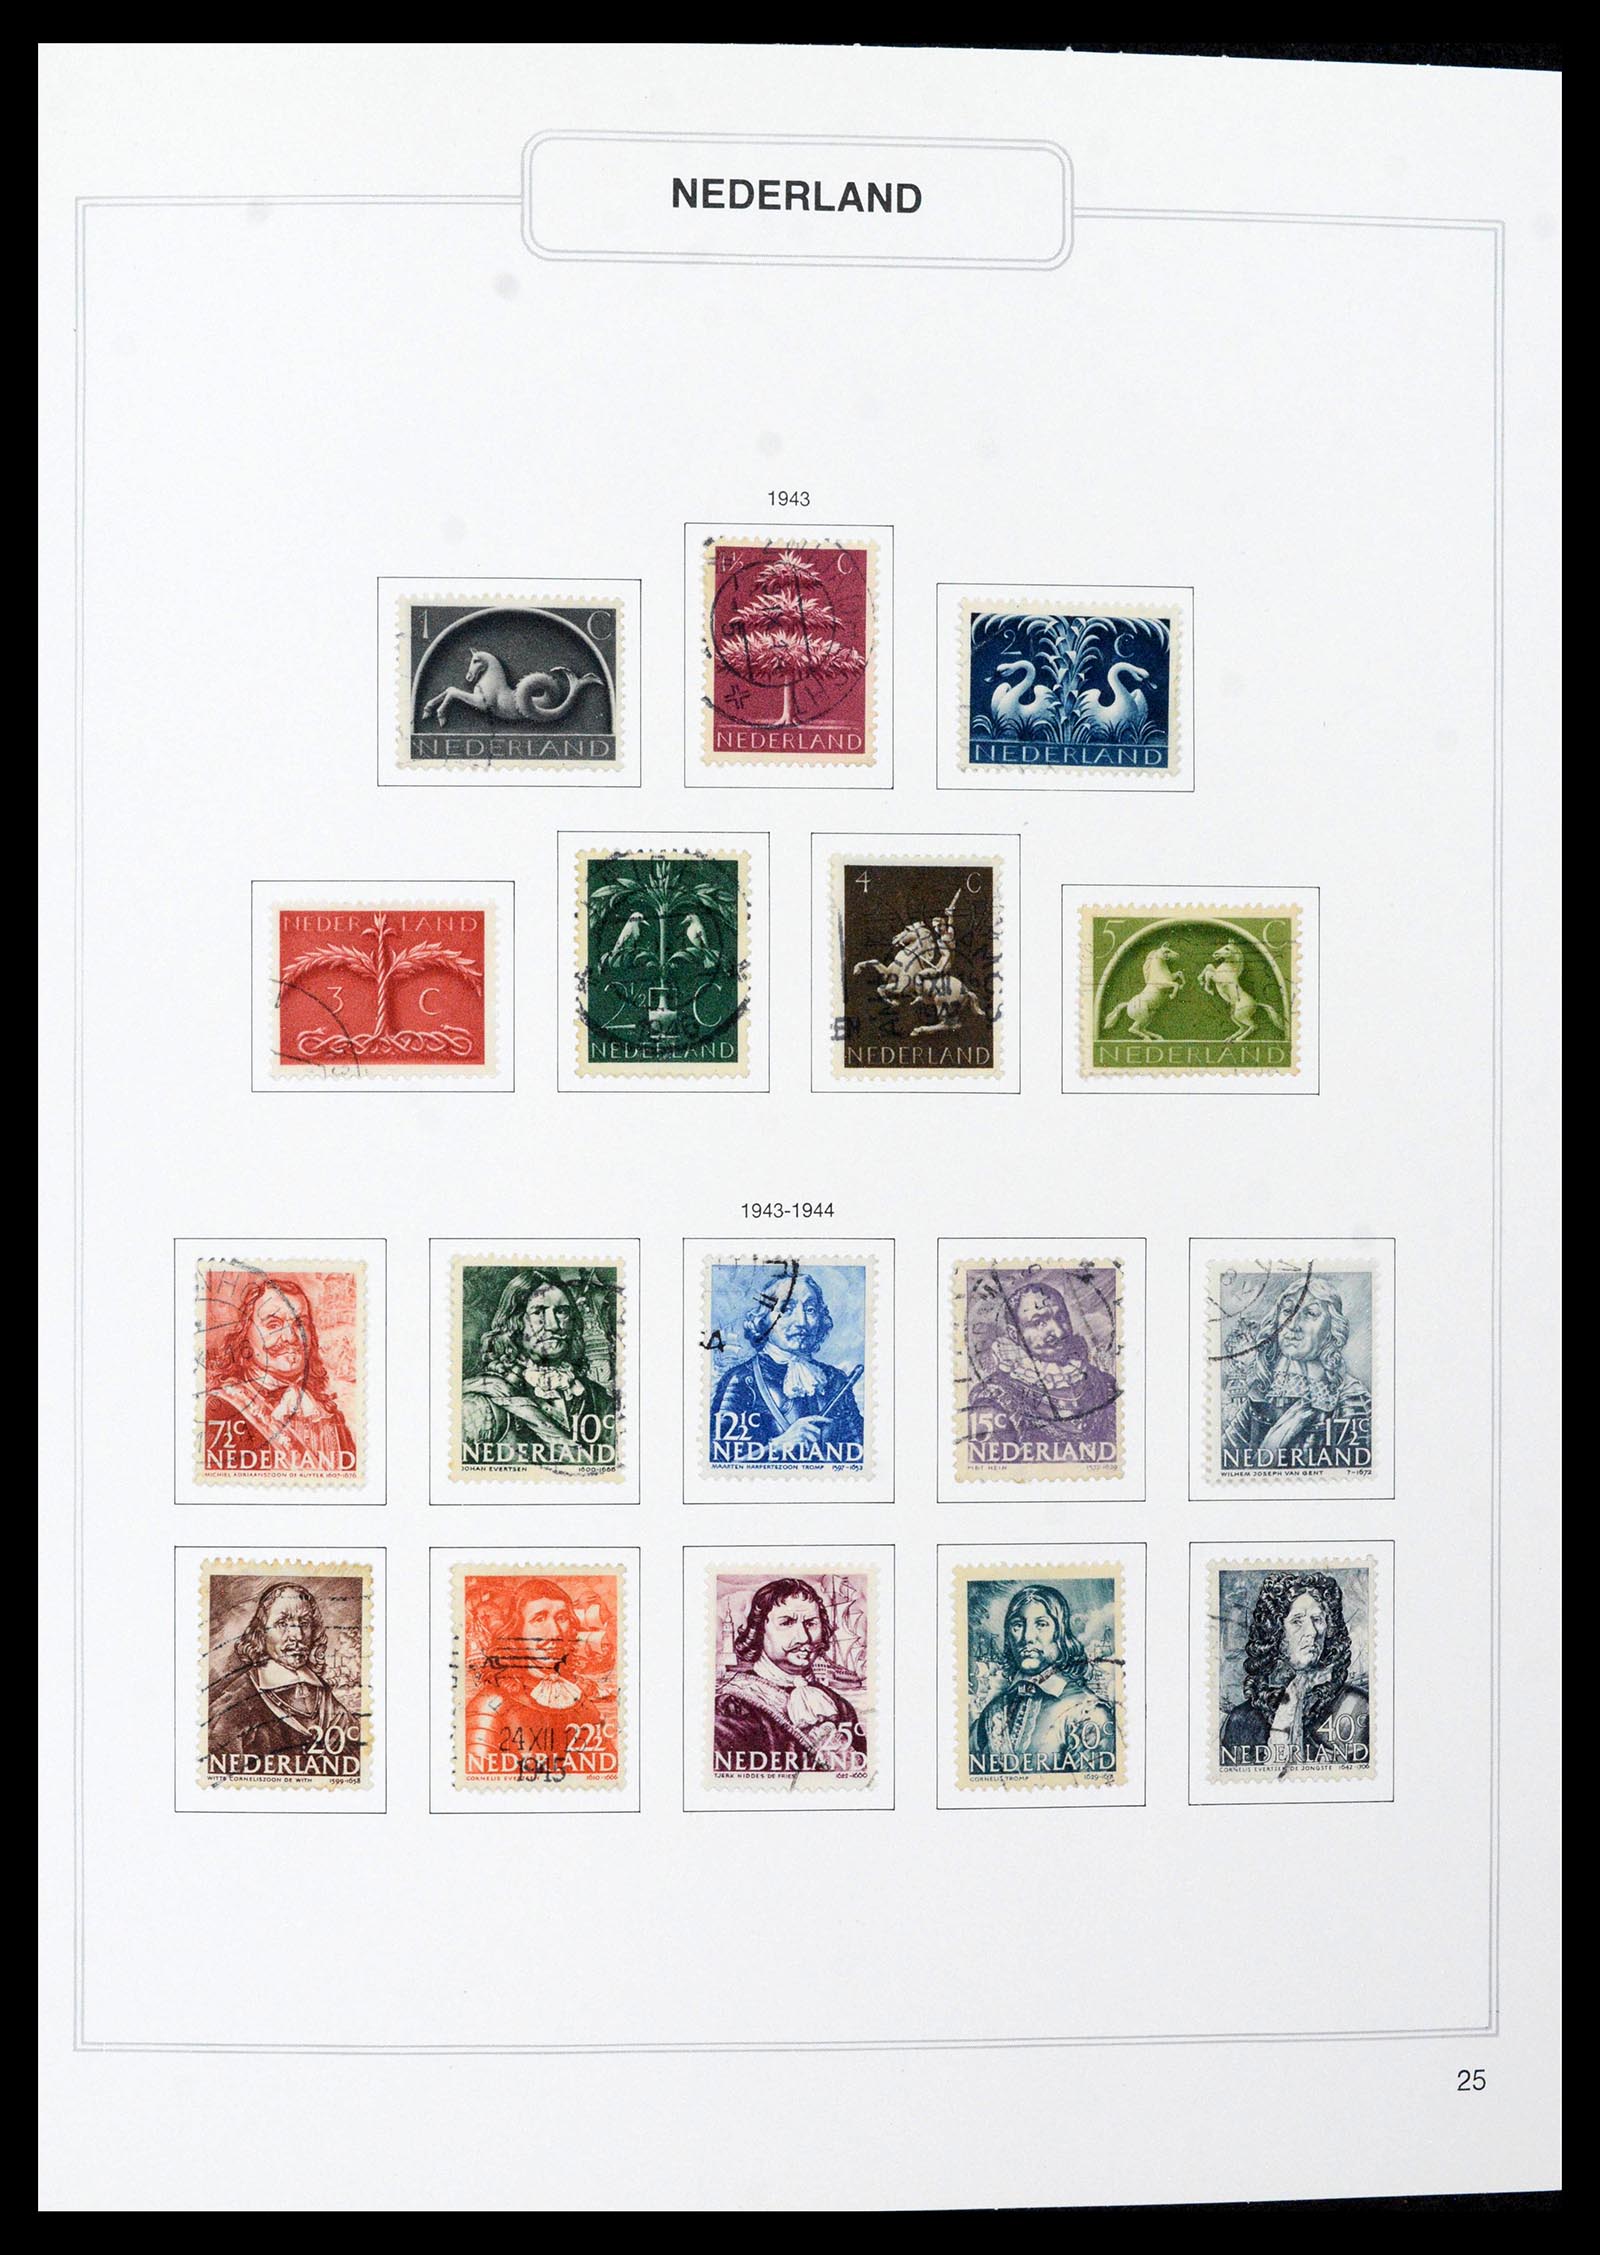 39261 0025 - Stamp collection 39261 Netherlands 1852-2015.